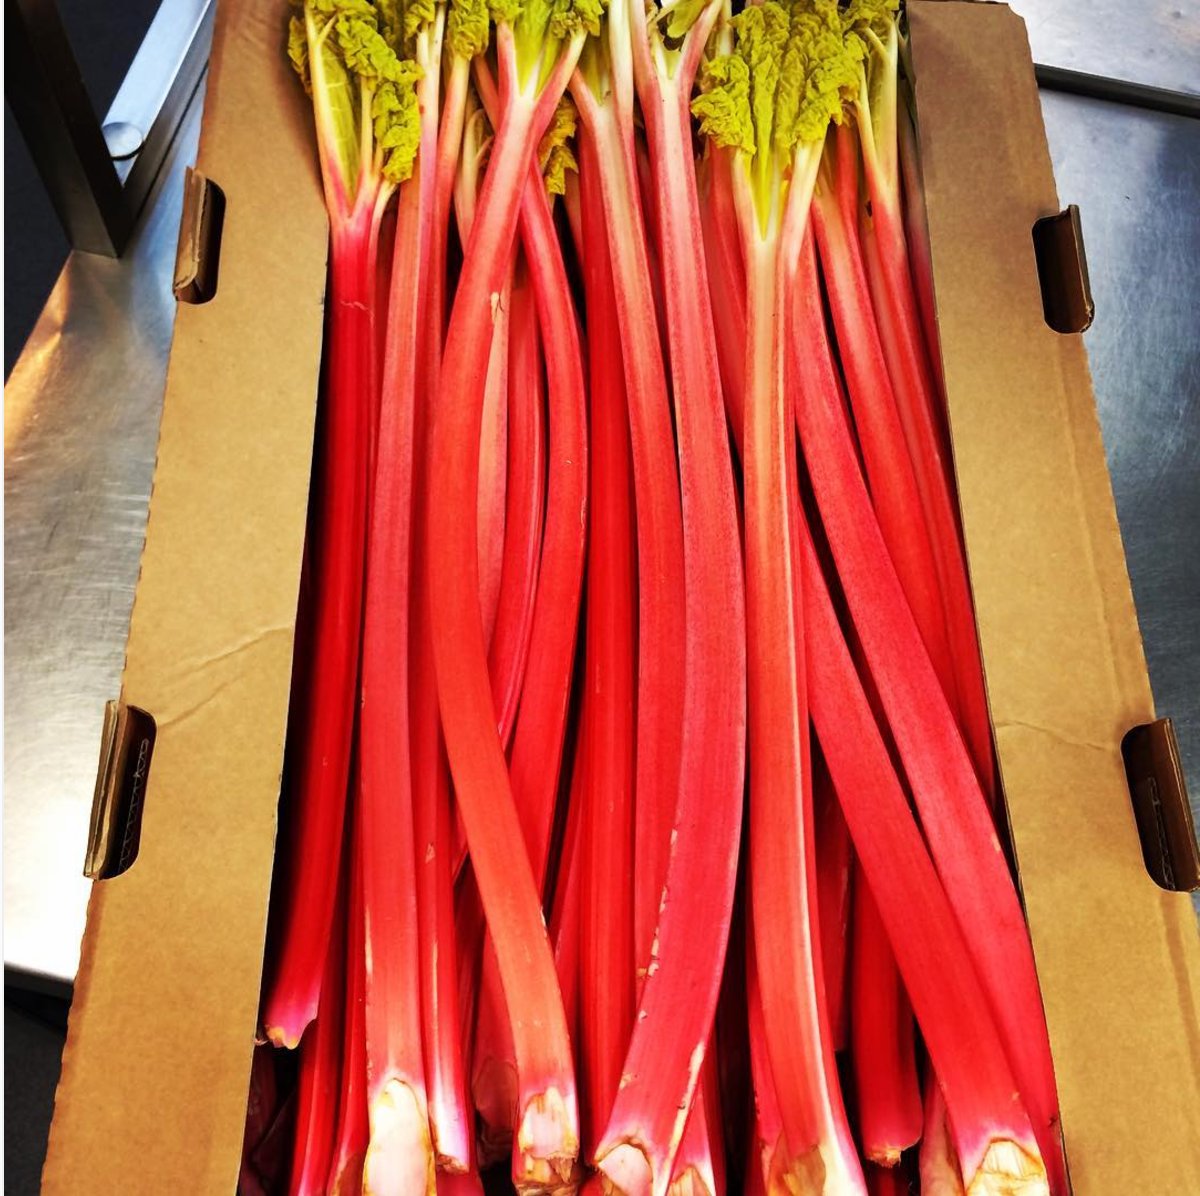 Head chef @paulwelburn is excited; it’s time again! Food of the gods! #yorkshirerhubarb #yorkshirefood #GodsOwnCounty